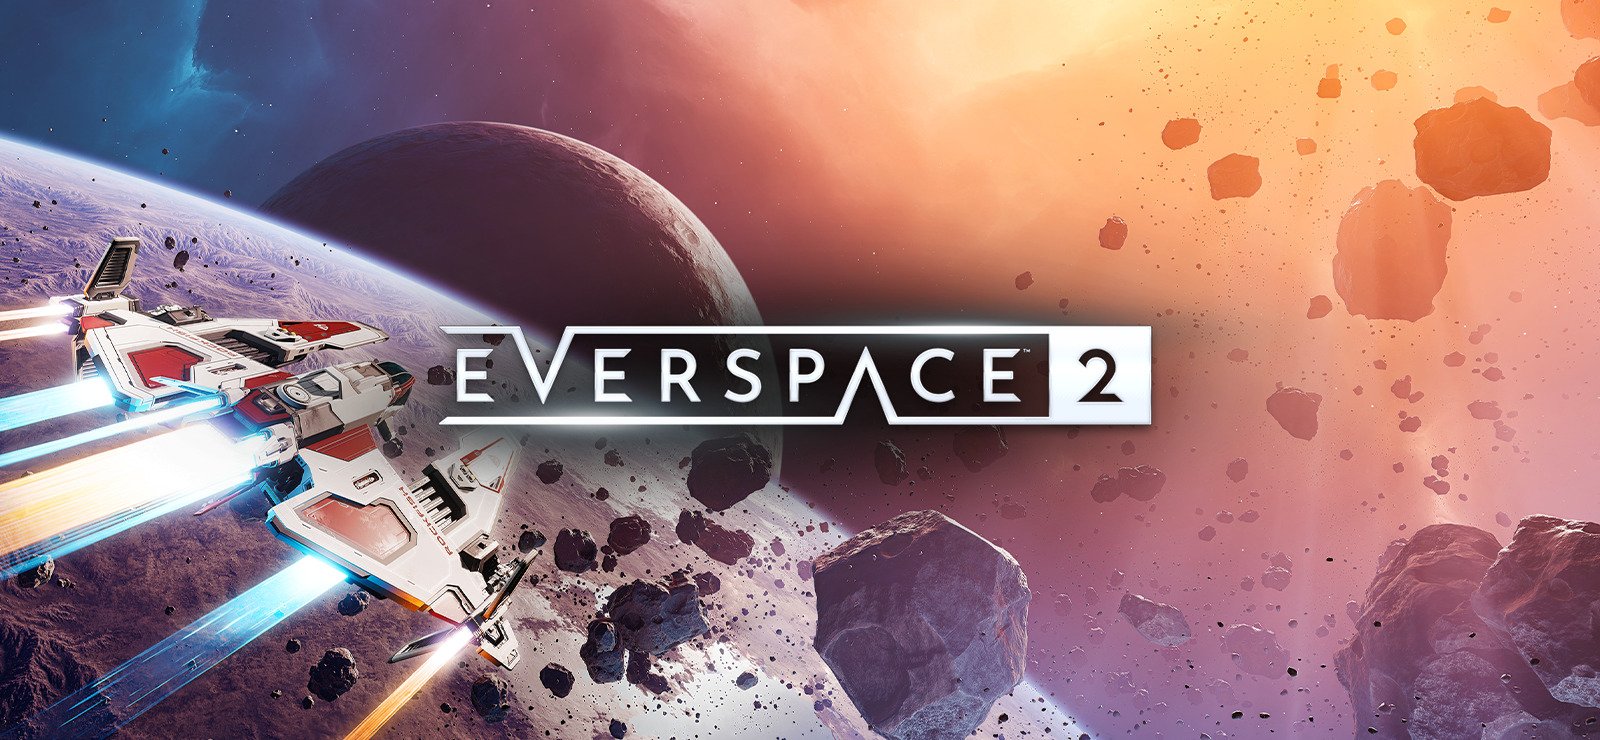 EVERSPACE 2 30